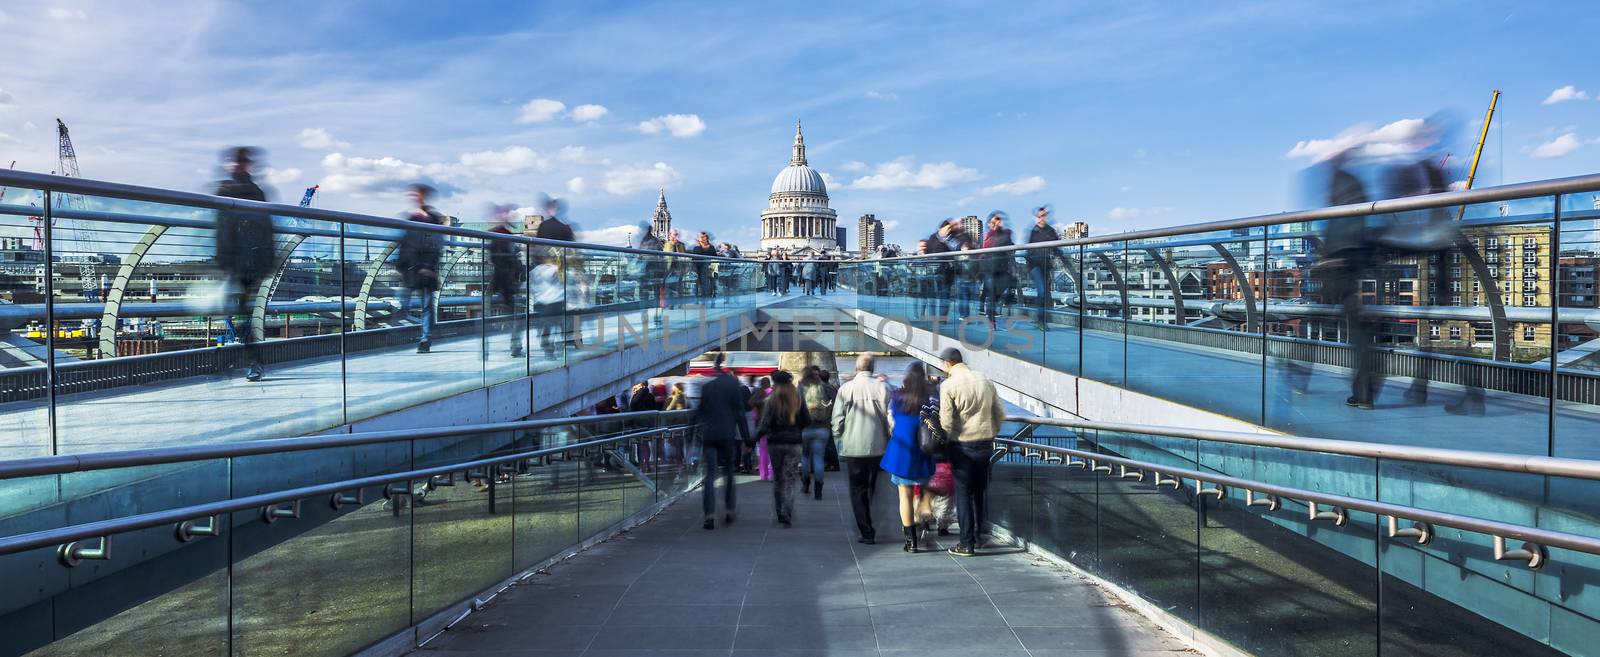 the Millennium footbridge looking towards St. Paul's Cathedral, panoramic view.